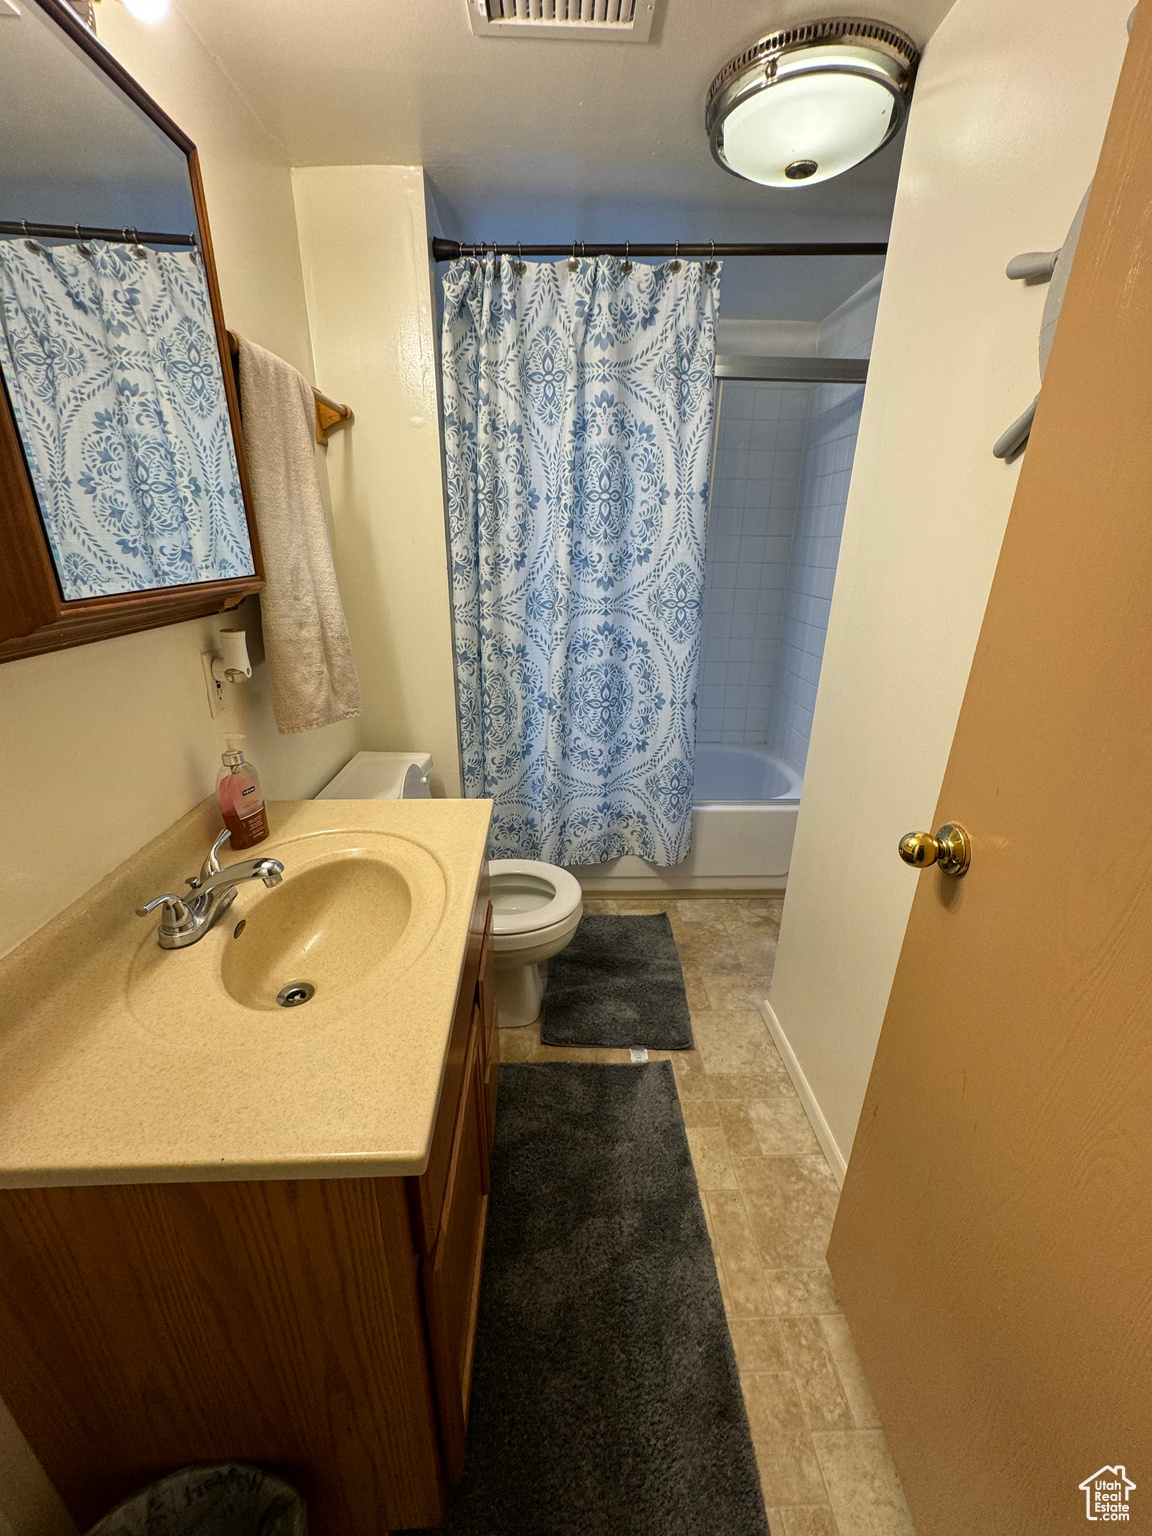 Full bathroom with oversized vanity, shower / bath combination with curtain, toilet, and tile flooring